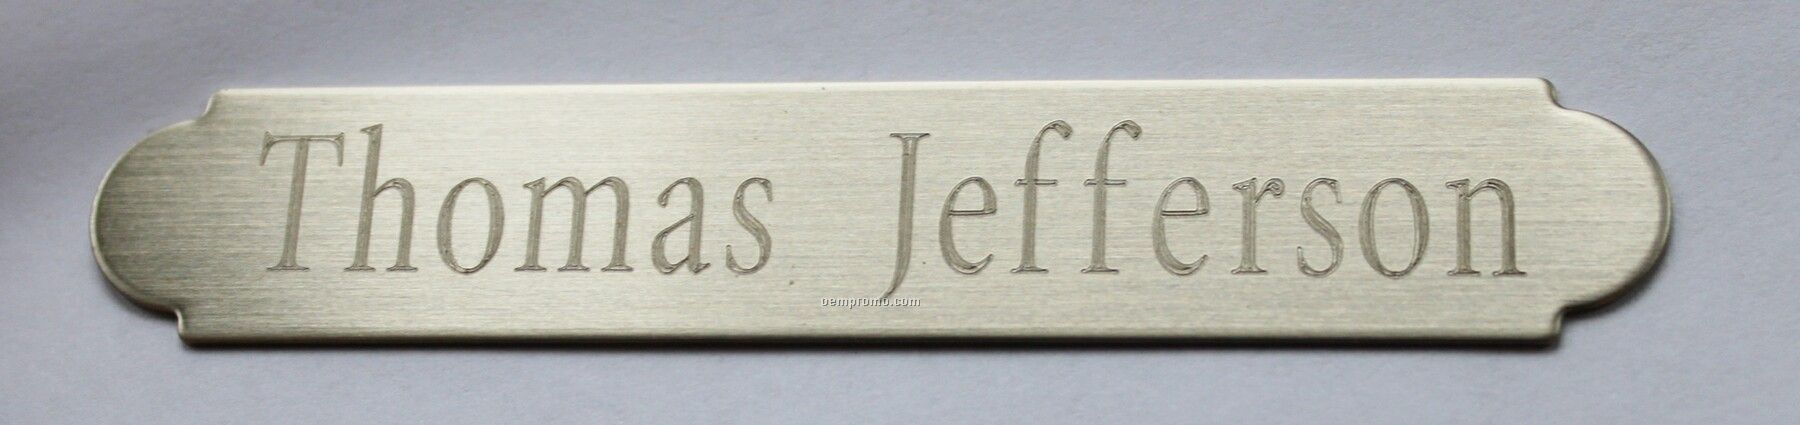 Name Plate Rotary Engraved Satin Nickel Silver (3" W X 1/2" H)